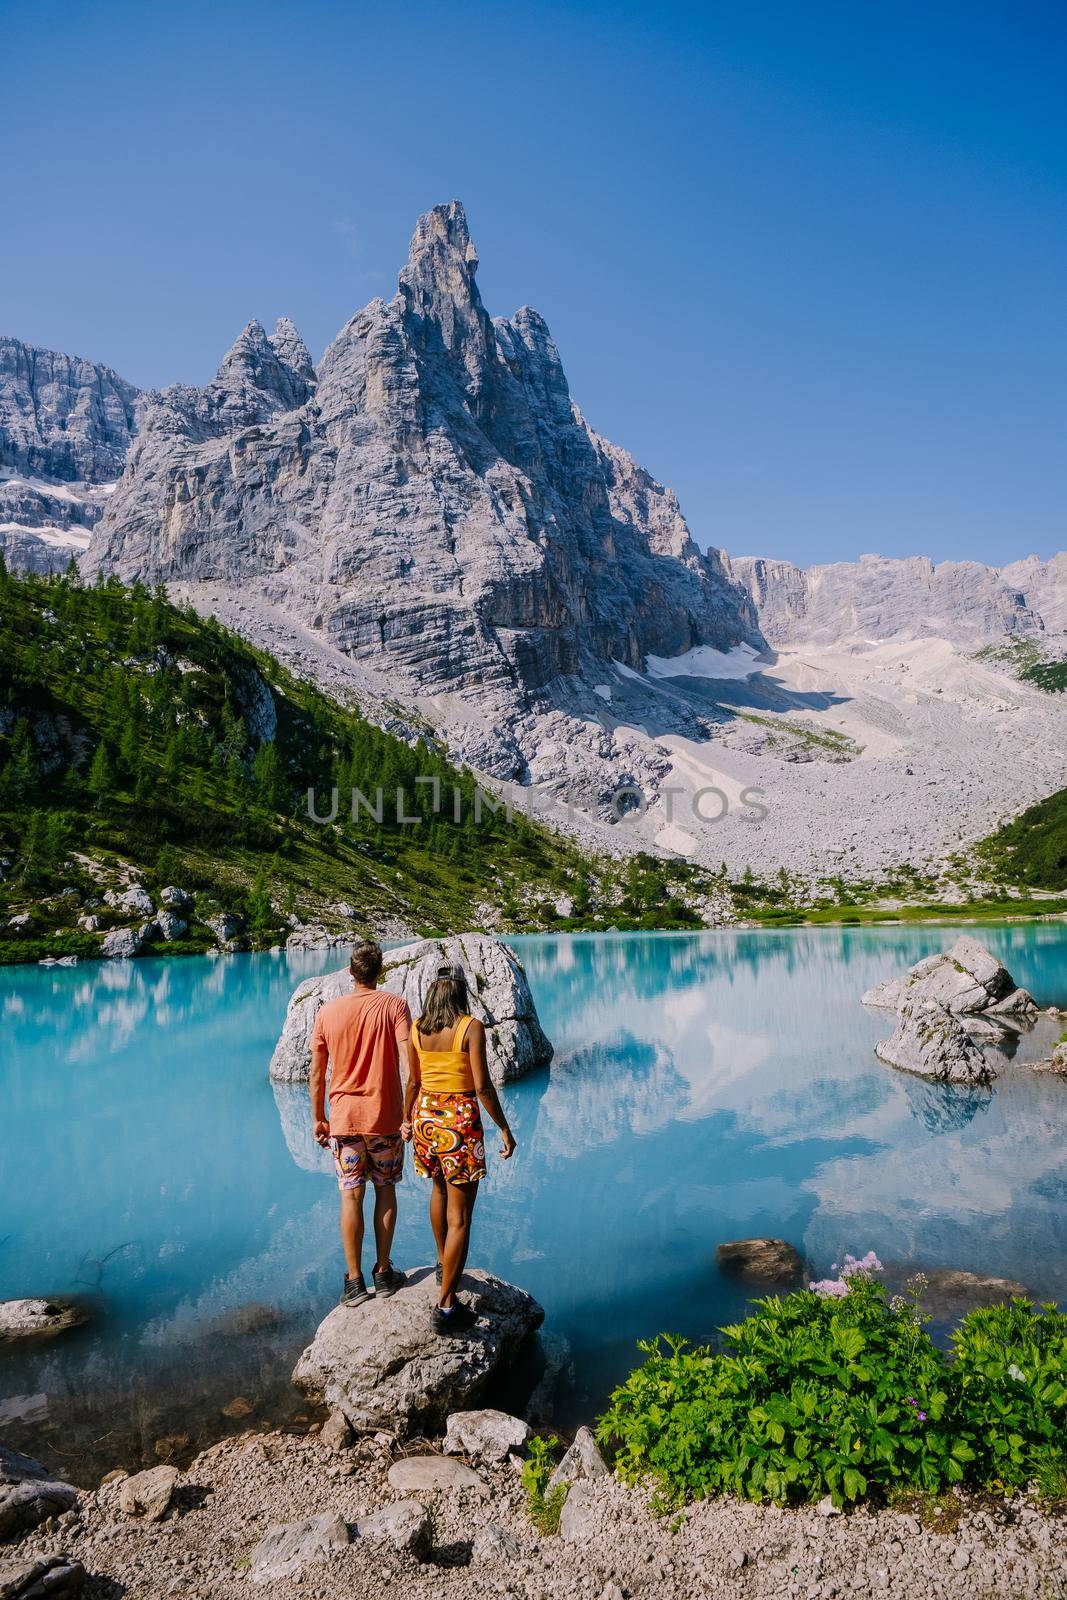 Lake Sorapis Italian Dolomites, Morning with clear sky on Lago di Sorapis in italian Dolomites, lake with unique turquoise color water in Belluno province in Nothern Italy by fokkebok